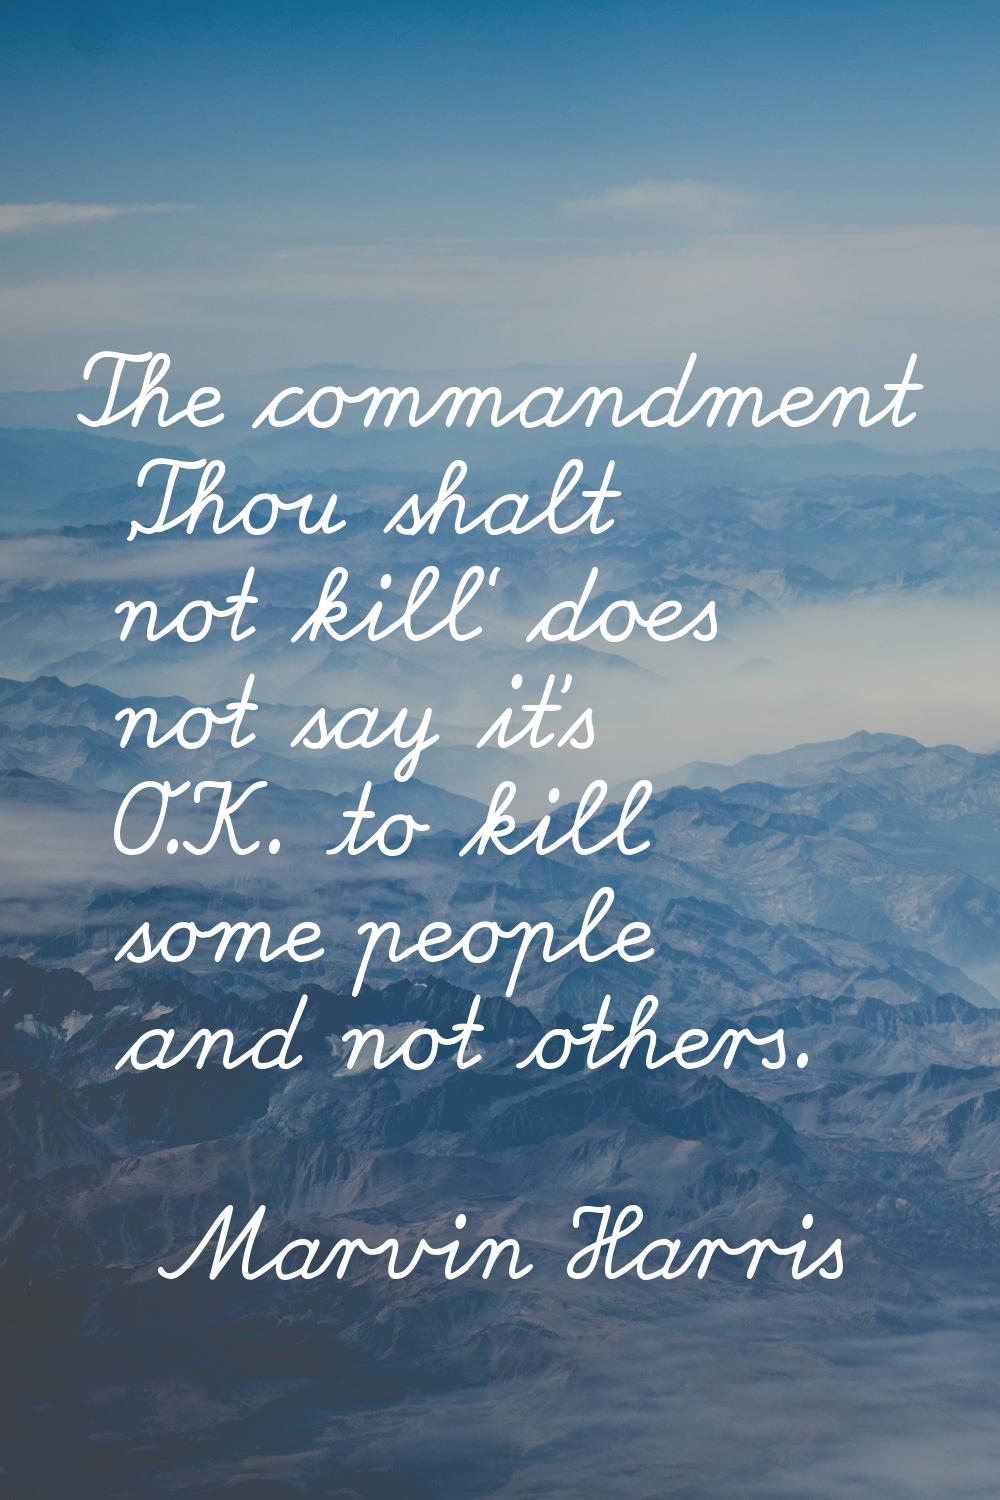 The commandment 'Thou shalt not kill' does not say it's O.K. to kill some people and not others.